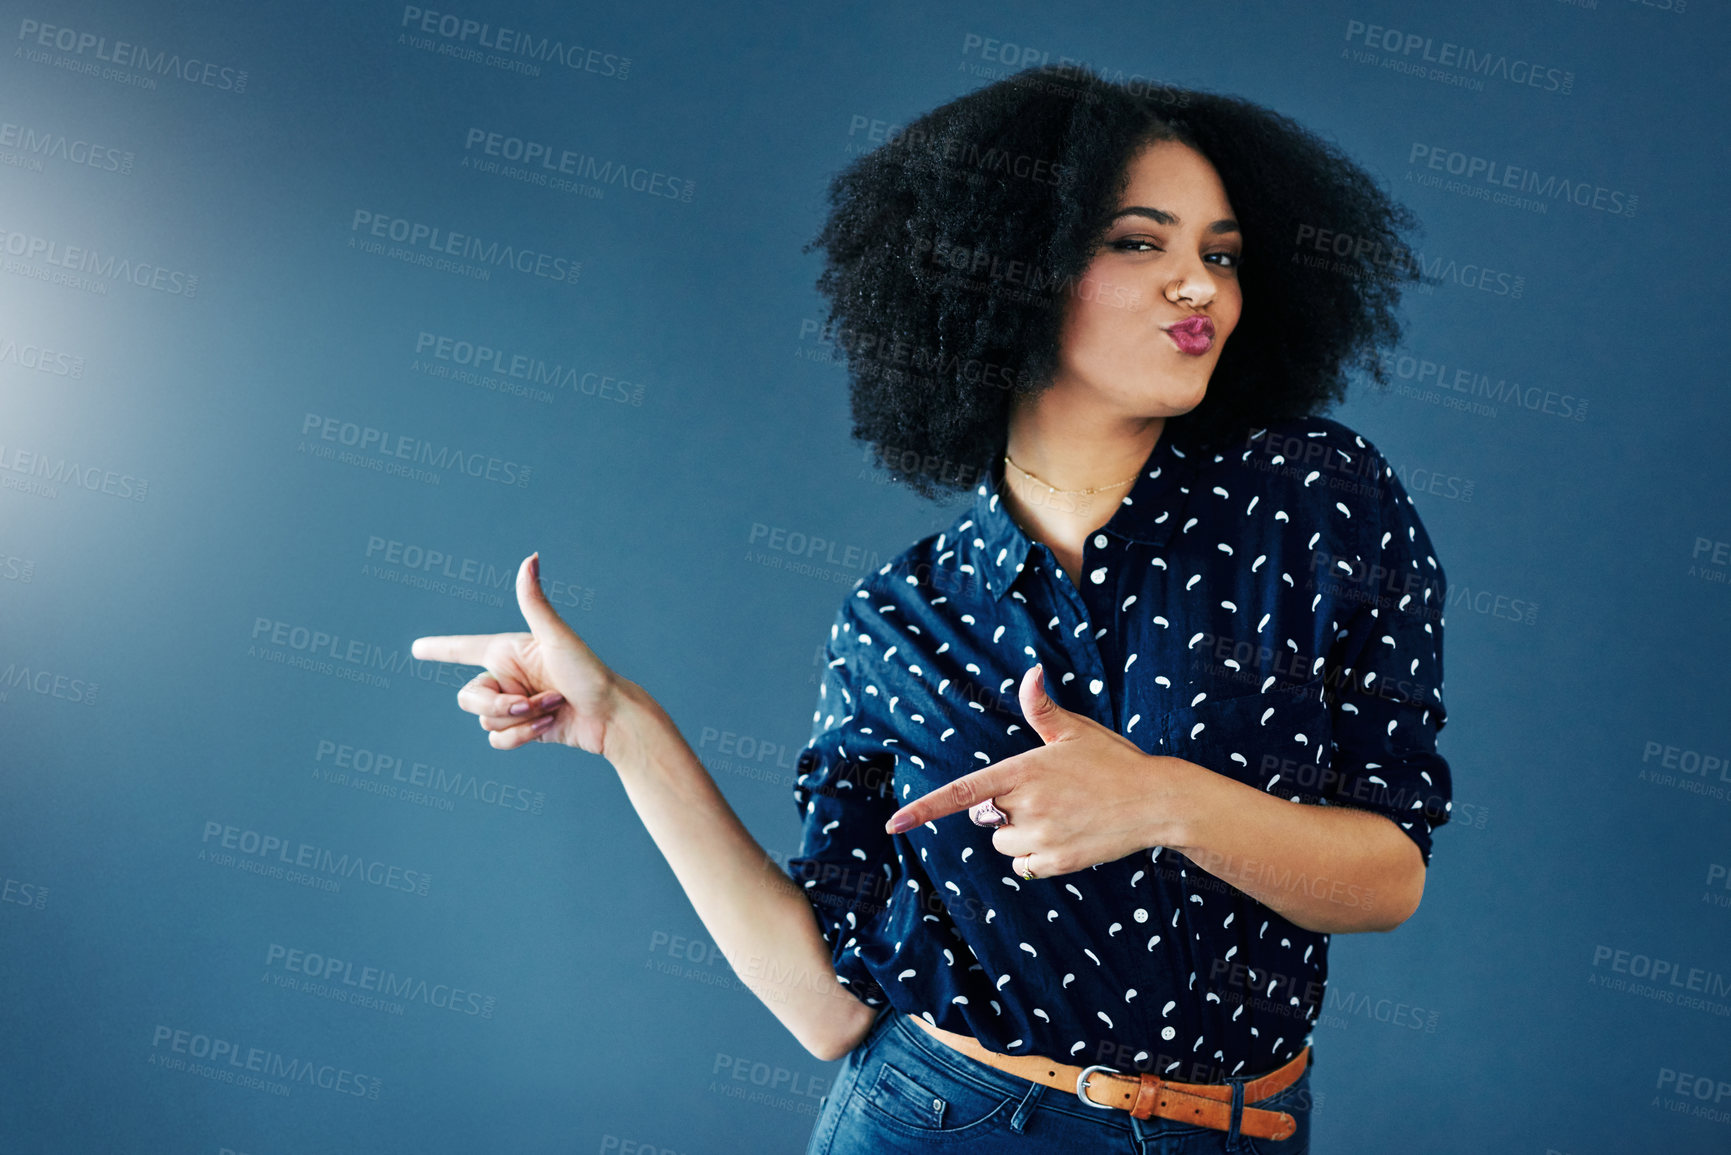 Buy stock photo Studio shot of a young woman gesturing towards copy space against a blue background